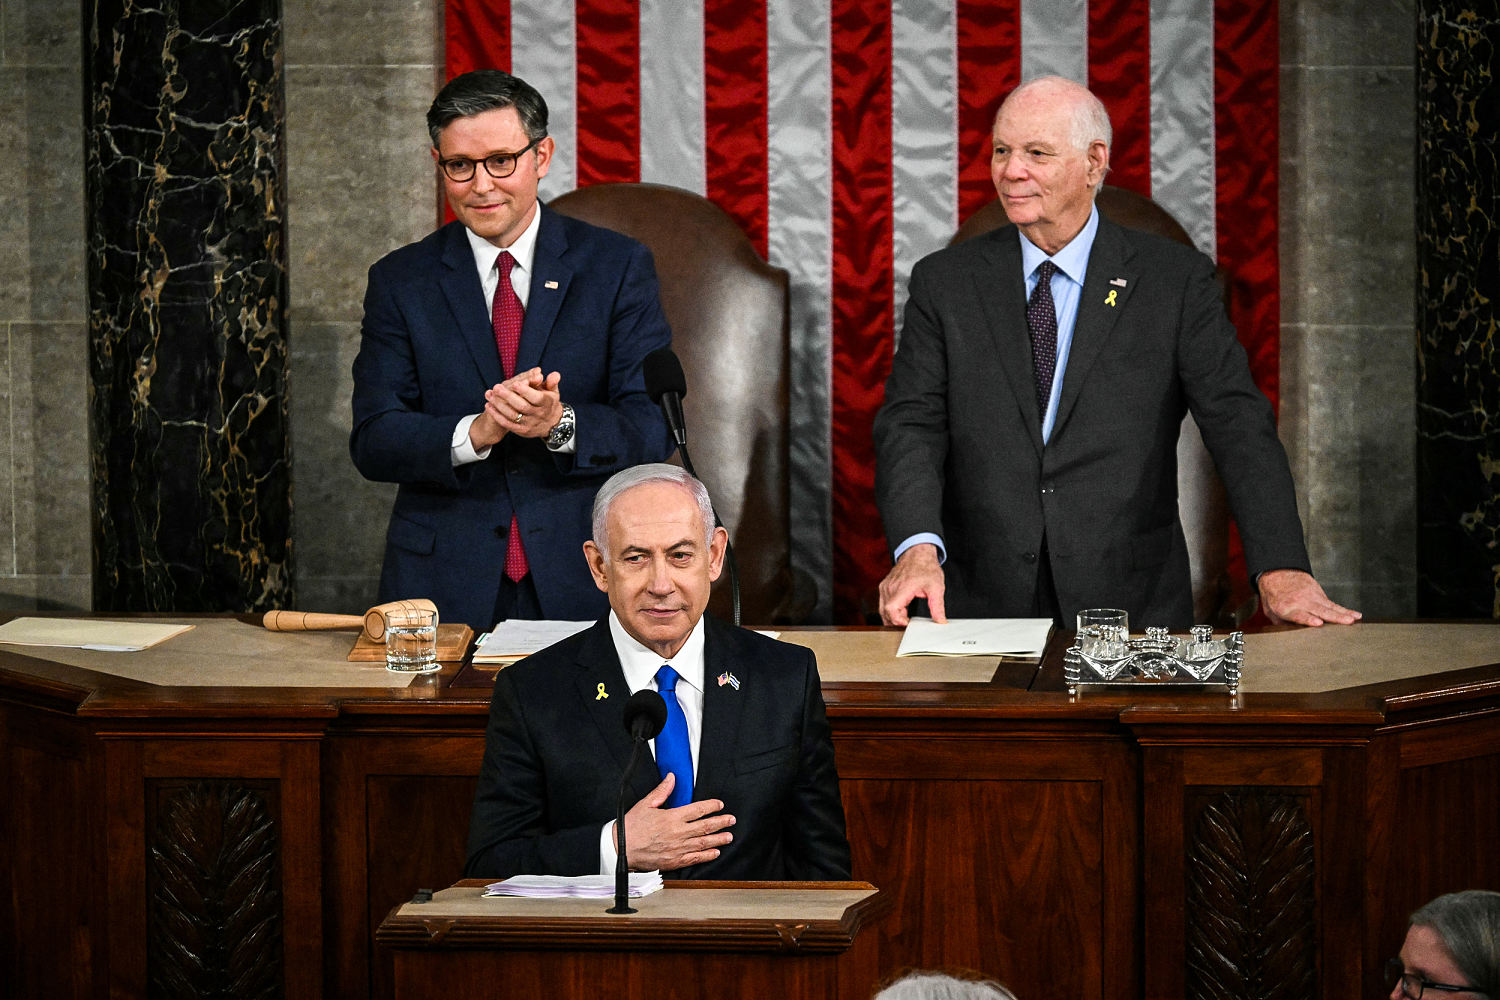 Netanyahu calls on Congress for bipartisan unity in support of Israel